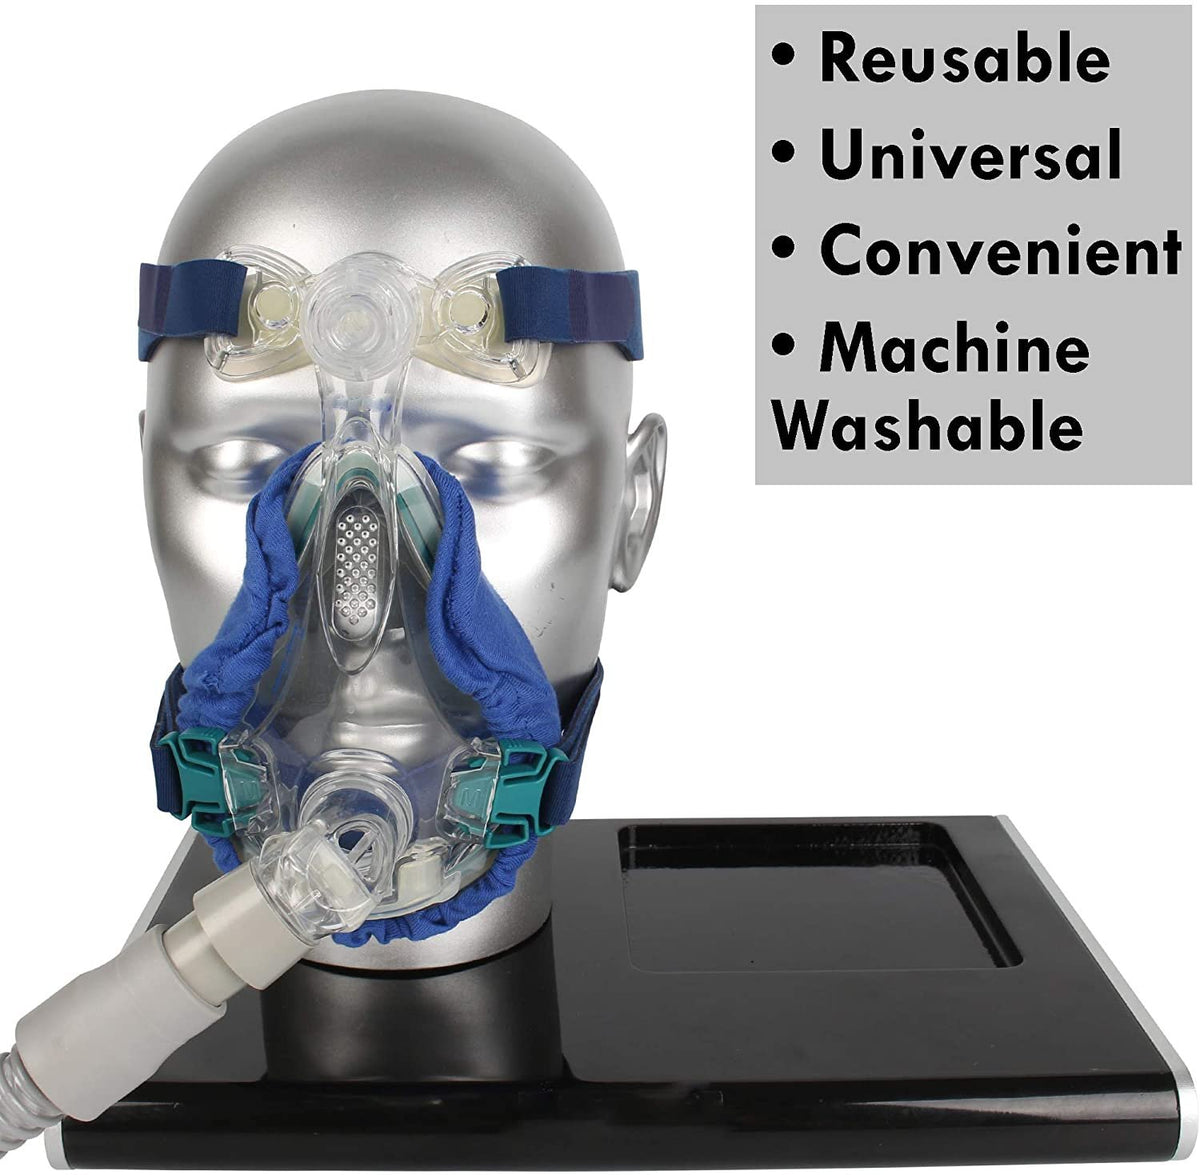 Mars Wellness CPAP Mask Liner - 3 Liners Per Pack - Reusable, Universal - Super Comfortable Material - Machine Washable - Easy Install